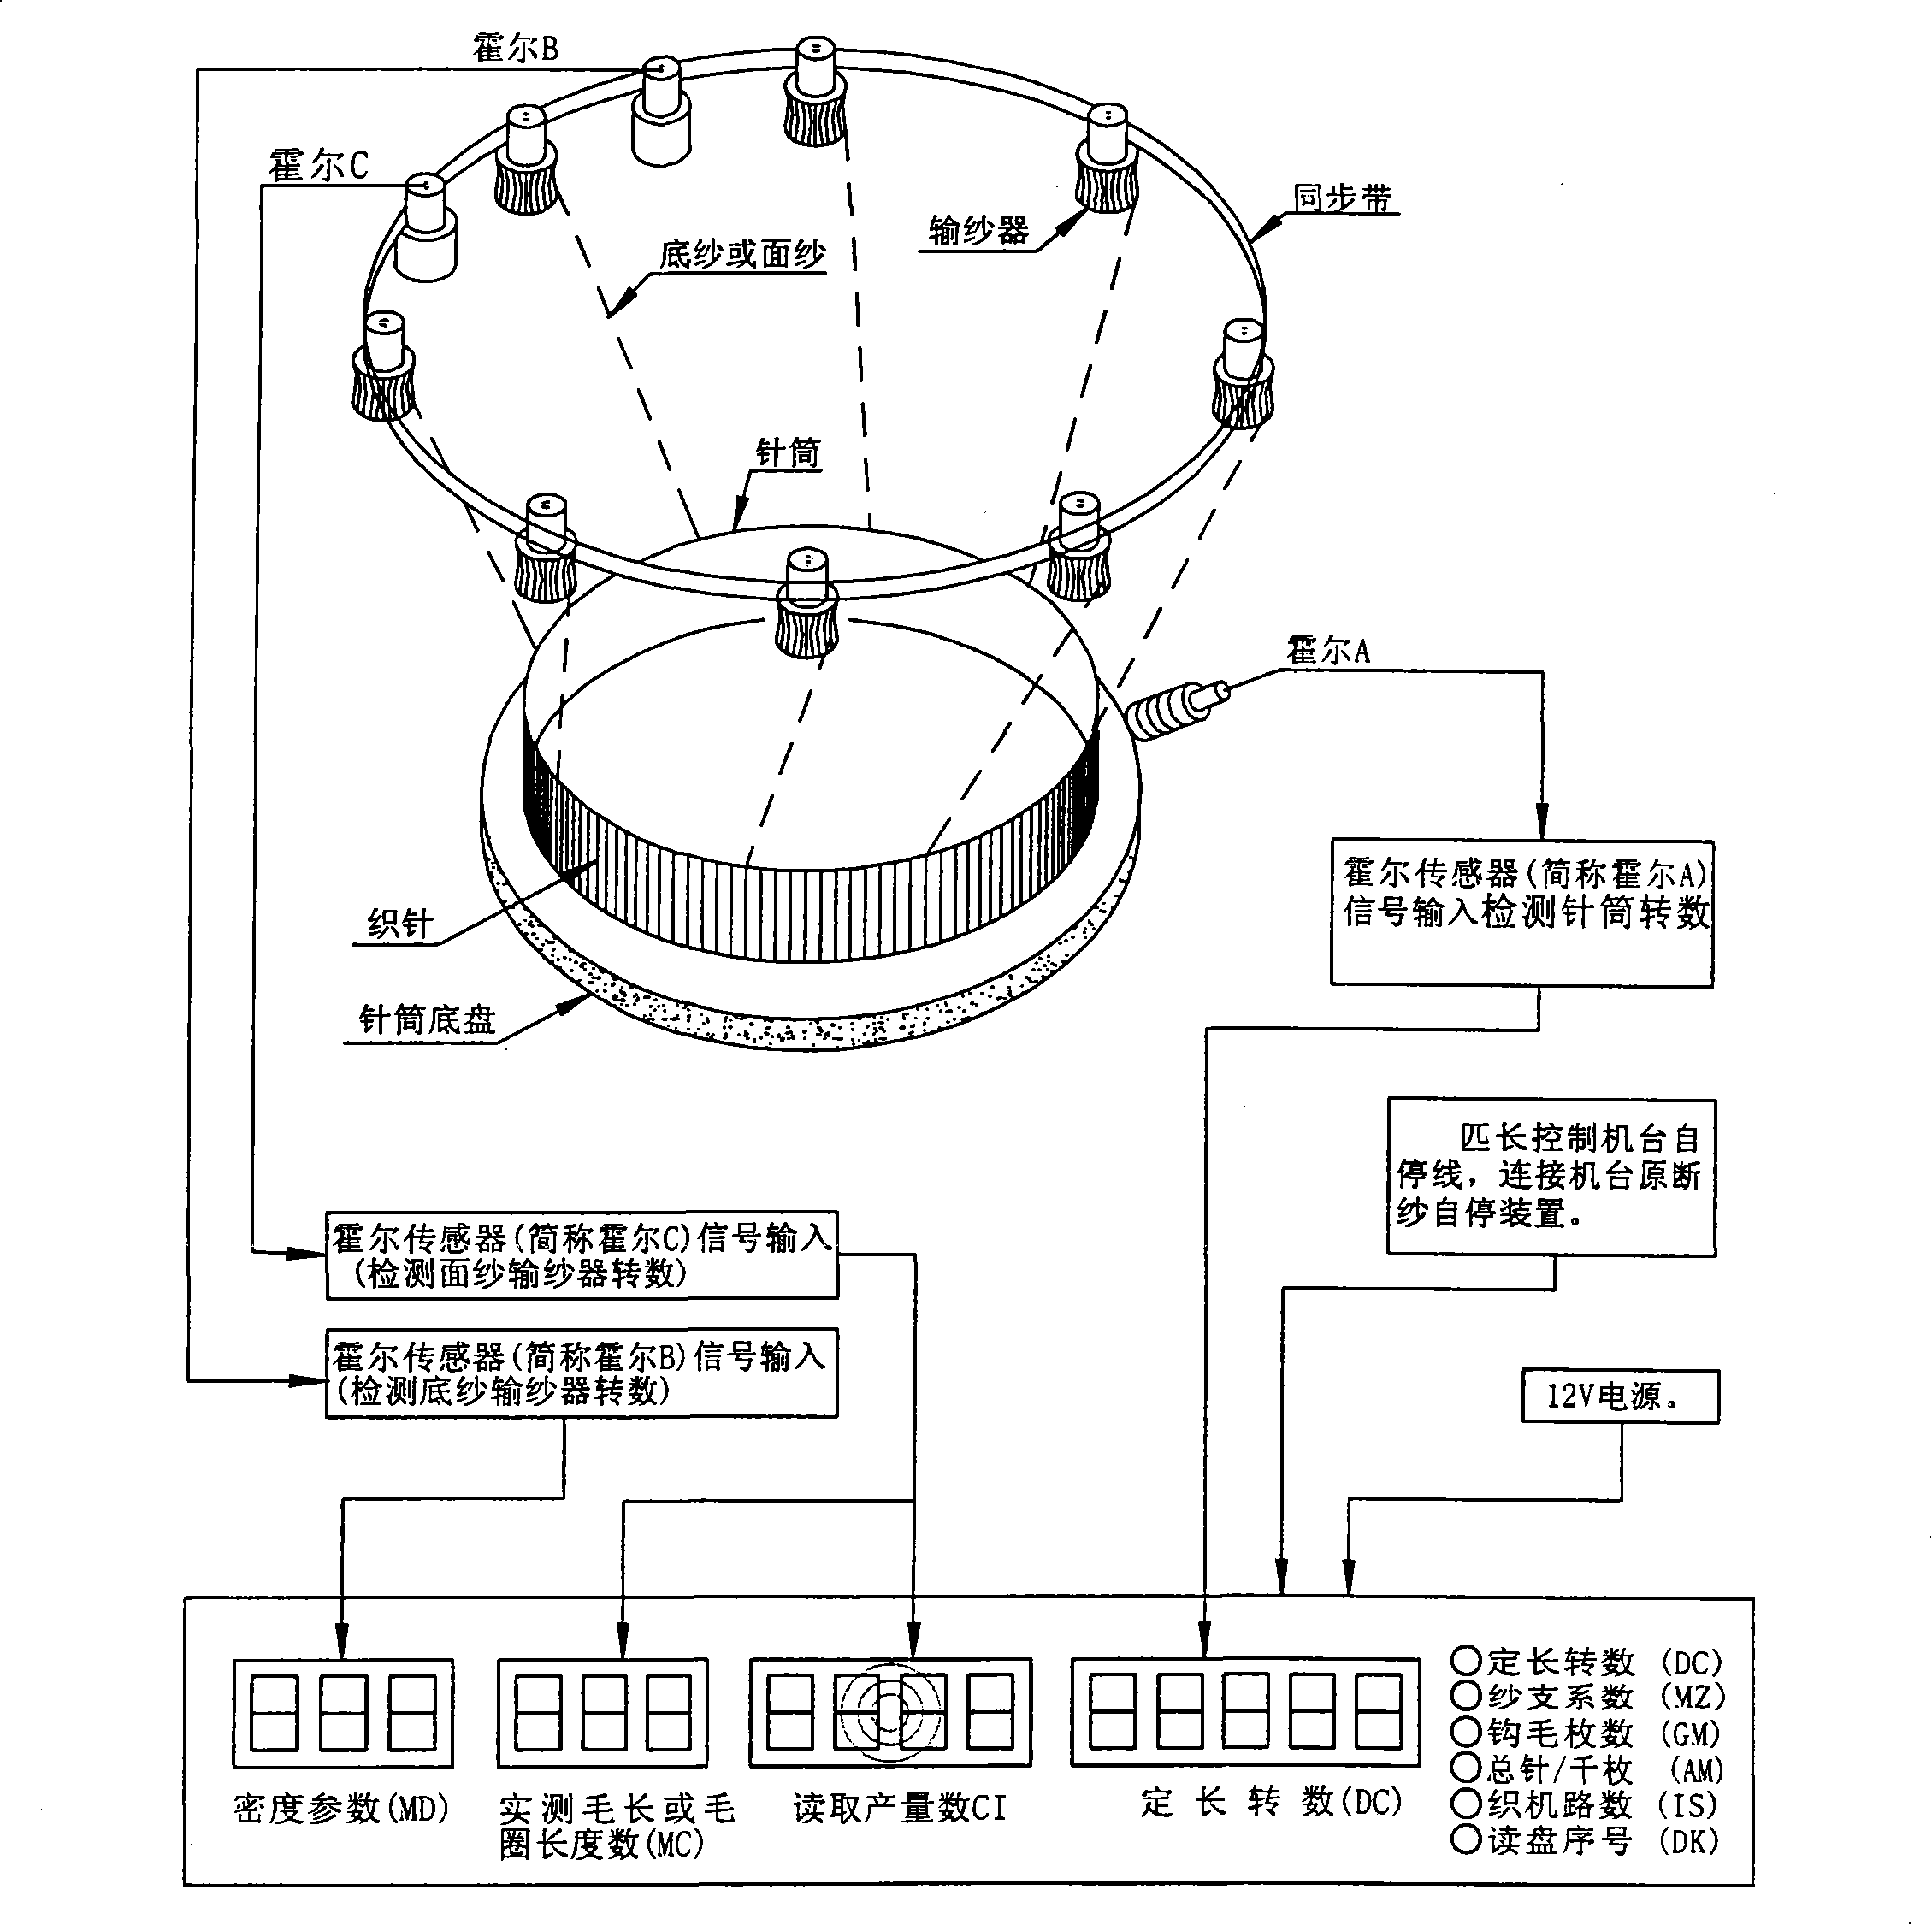 Parameter detecting device and method for textile weaving process